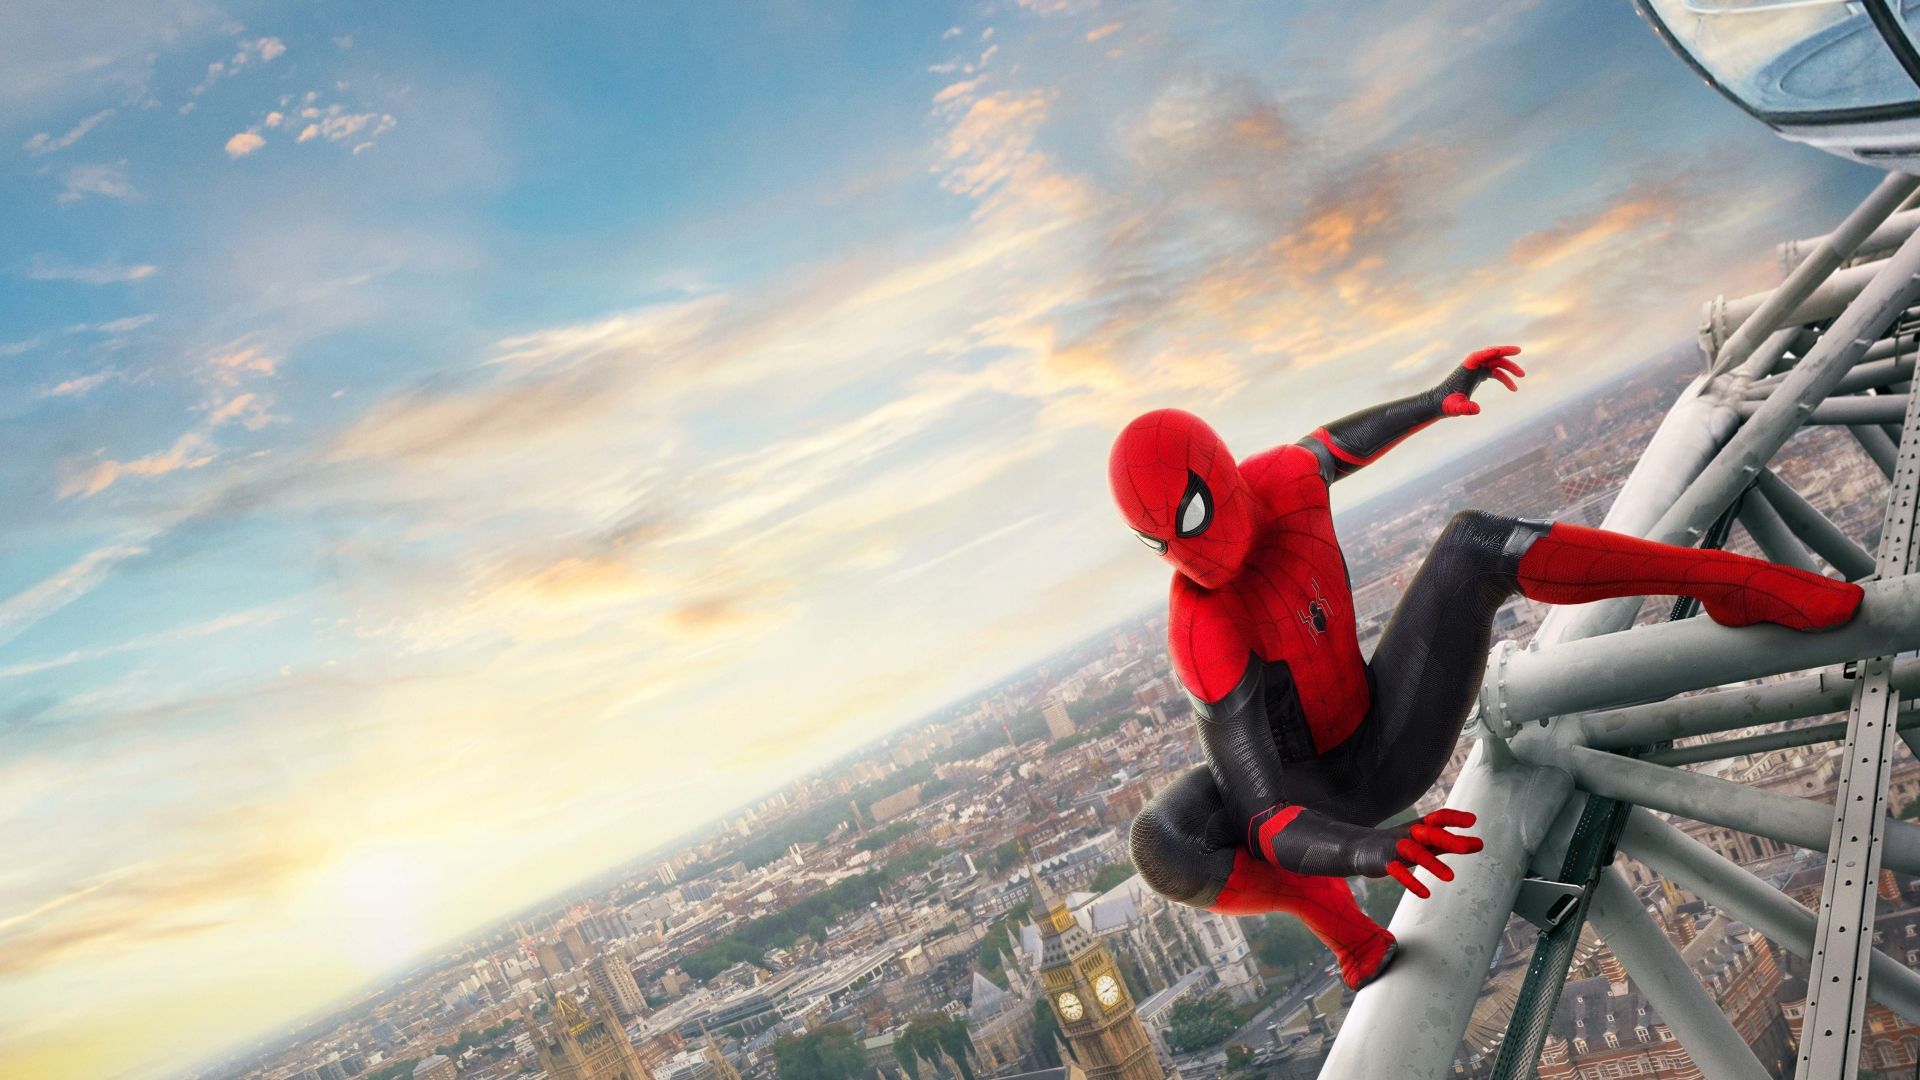 Spider Man Far From Home 4K 1080P Laptop Full HD Wallpaper, HD Movies 4K Wallpaper, Image, Photo And Background Den. Marvel Wallpaper Hd, Laptop Wallpaper Desktop Wallpaper, Computer Wallpaper